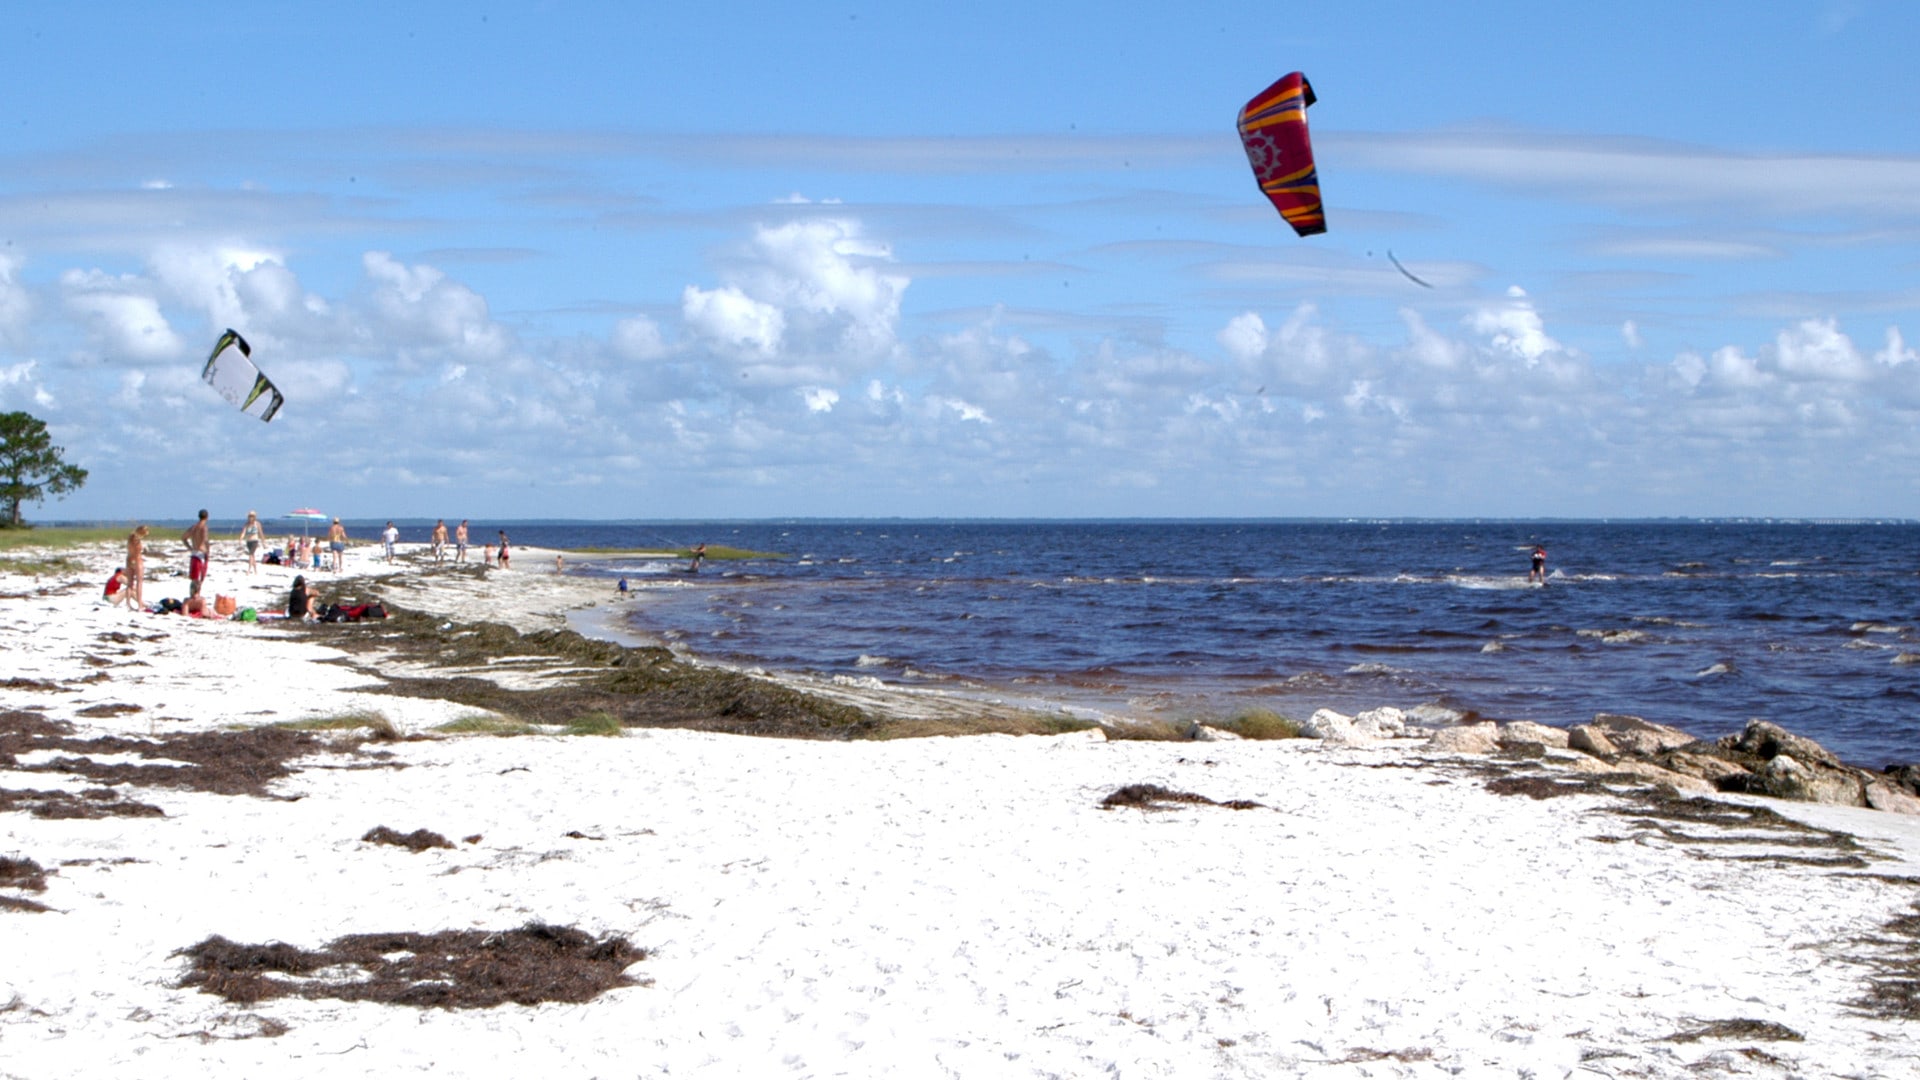 People on beach looking at water and kite surfing